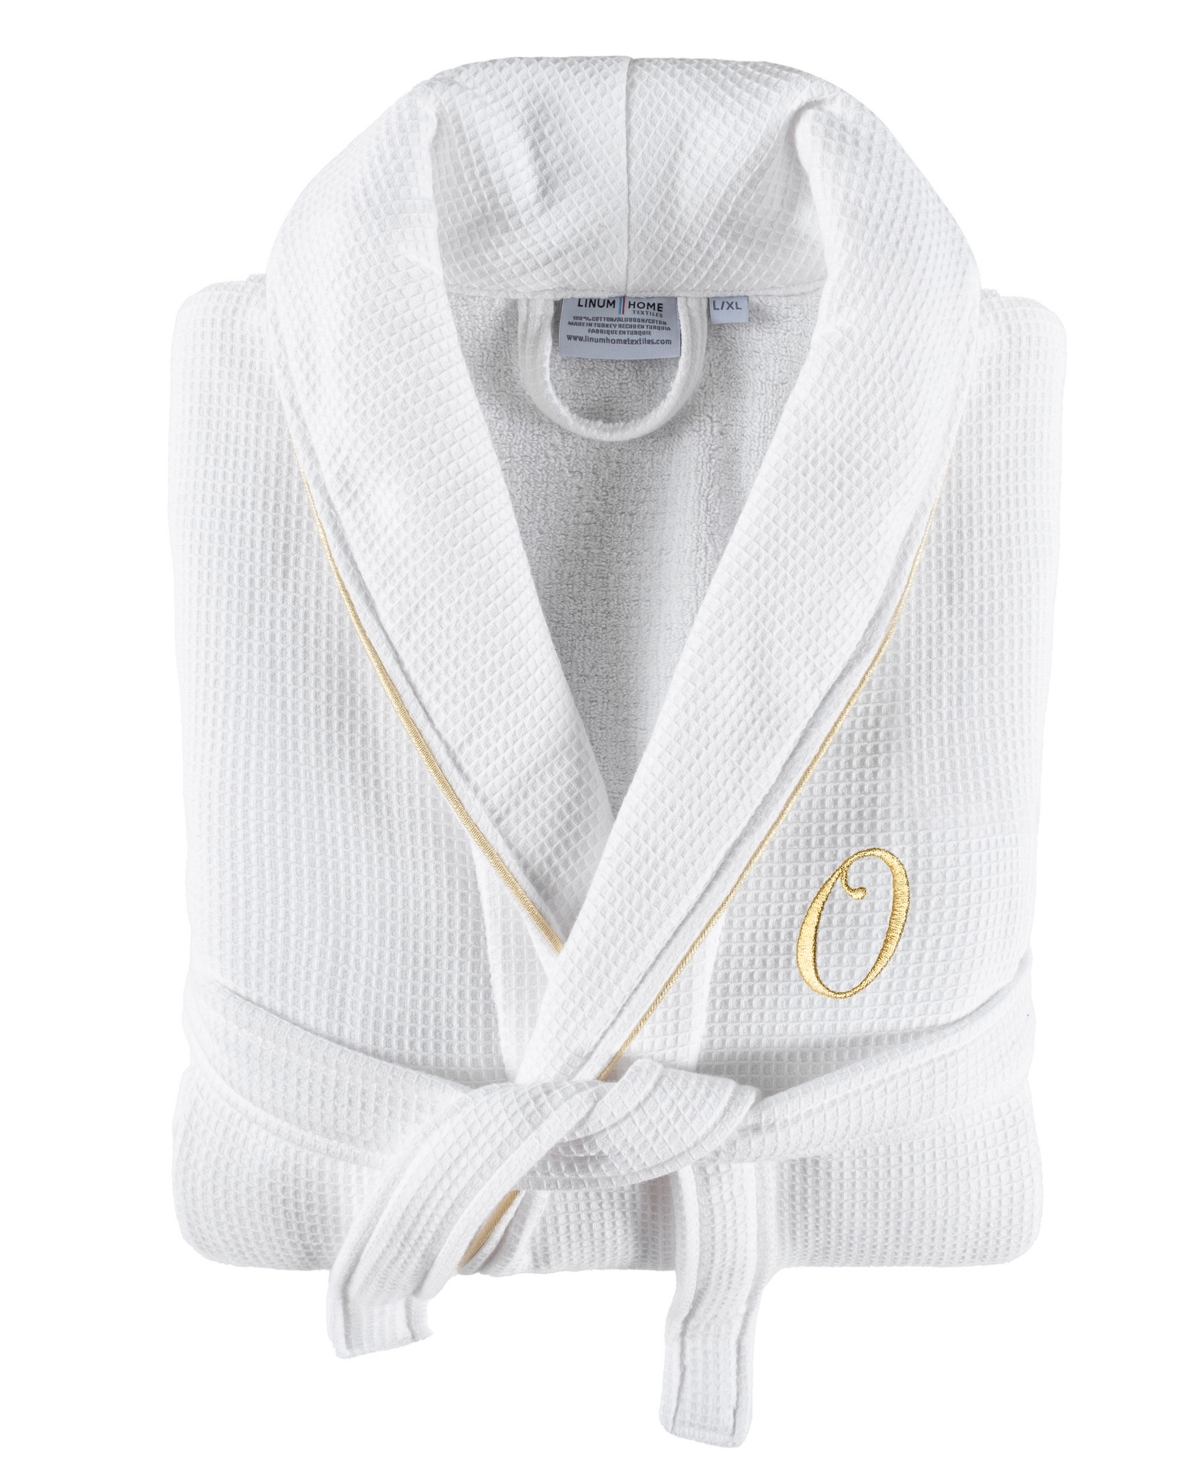 Linum Home Textiles 100% Turkish Cotton Unisex Personalized Waffle Weave Terry Bathrobe With Satin Piped Trim In White O